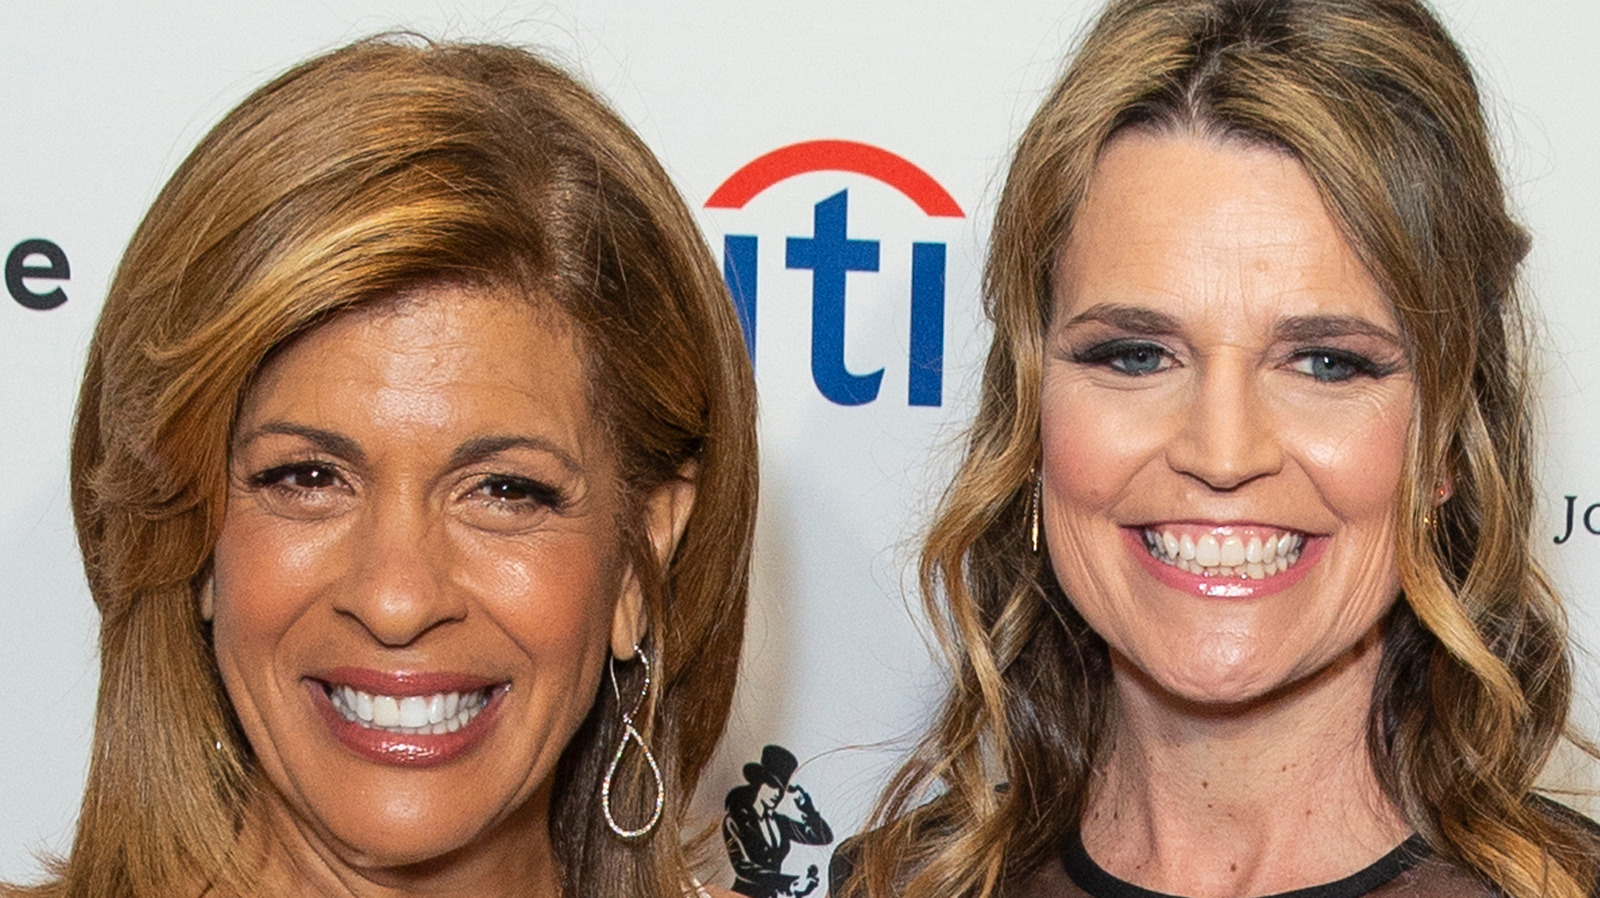 Body Language Expert Peels Back The Layers Of Hoda Kotb And Savannah Guthrie’s Rumored Feud – Exclusive